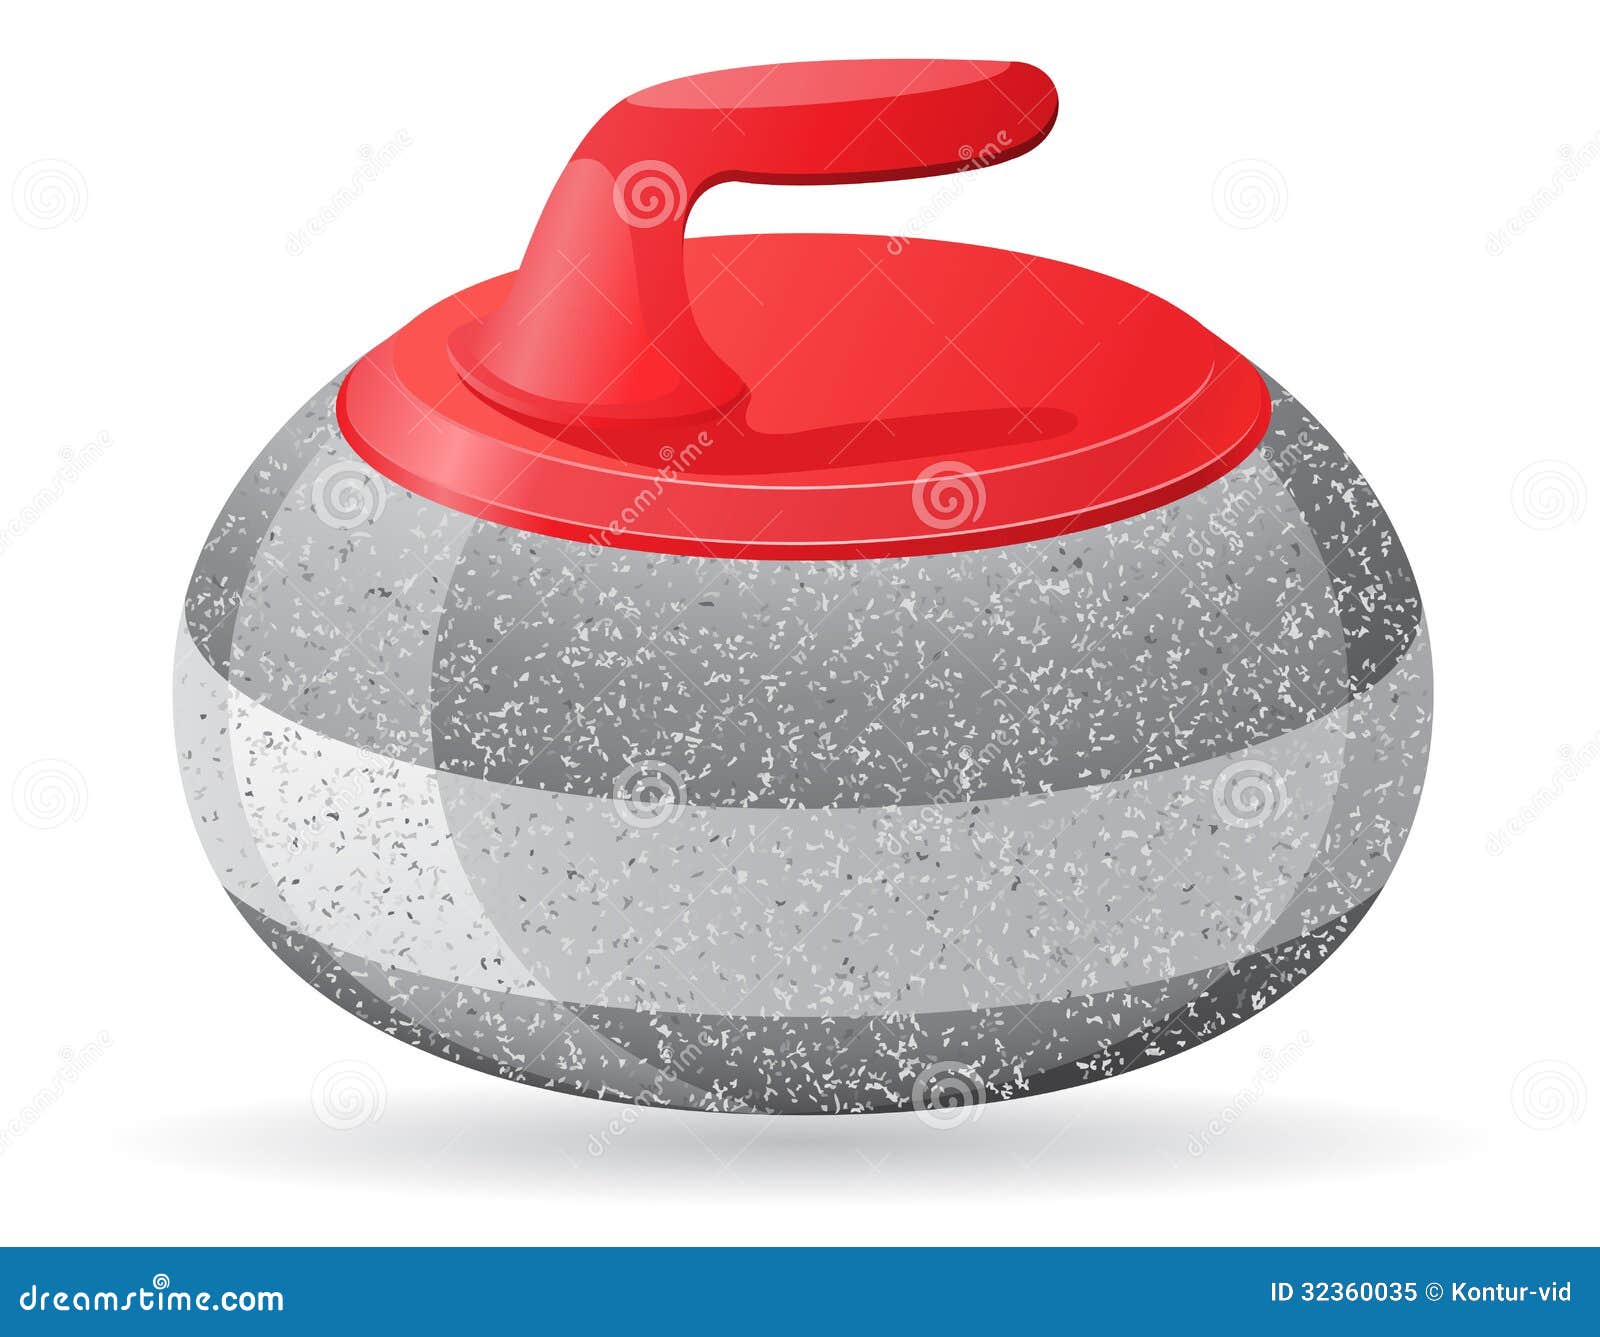 curling rings clipart - photo #32